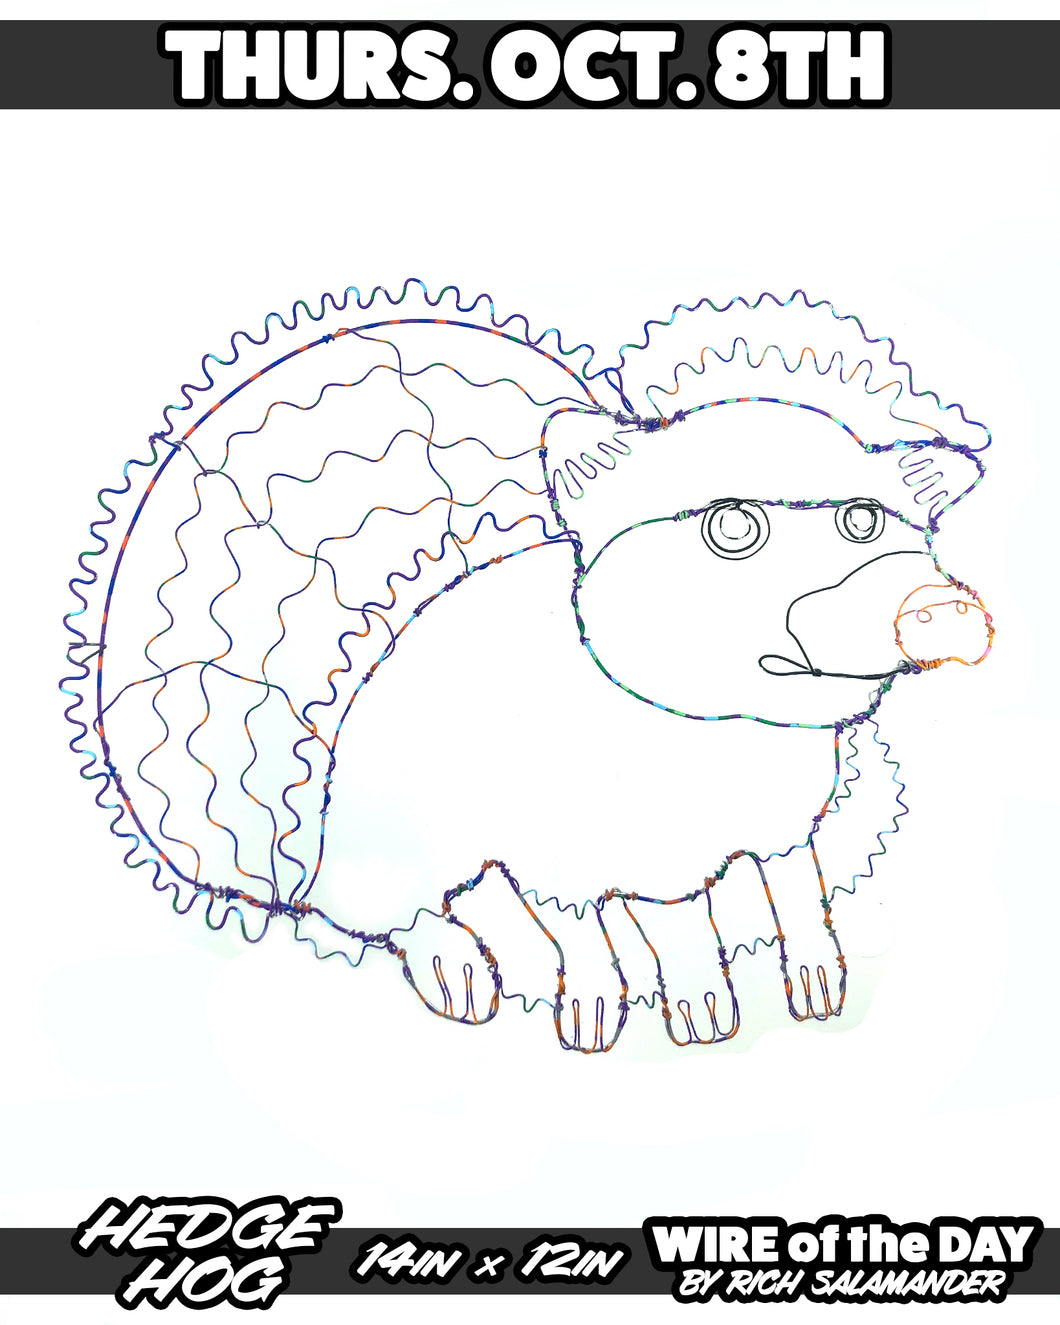 WIRE of the DAY HEDGE HOG